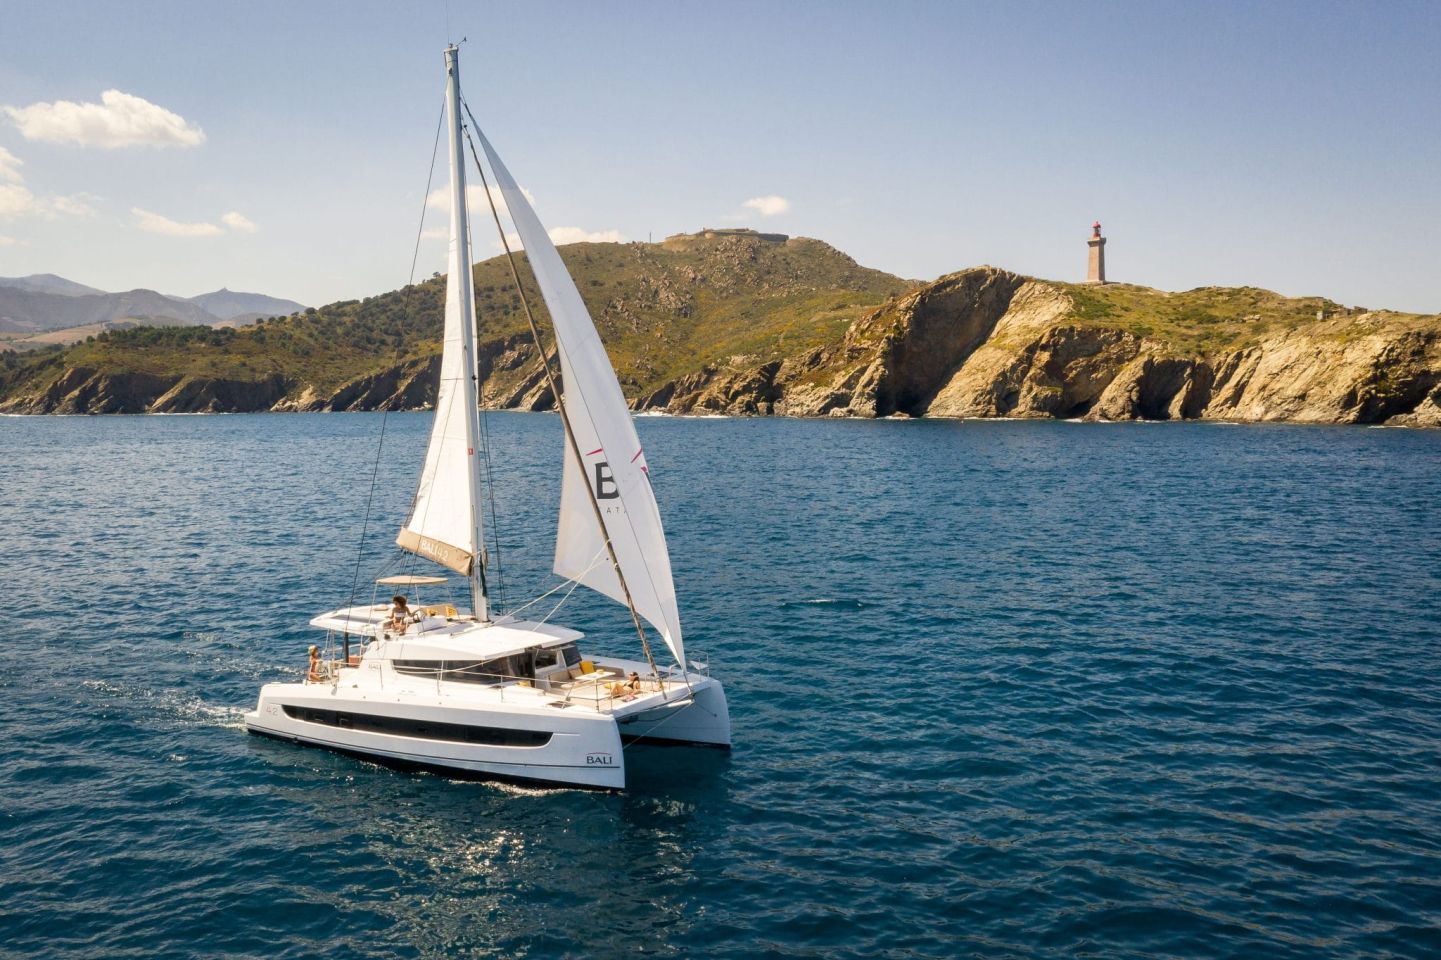 Bali 4.2 OW - Yacht Charter St Thomas & Boat hire in US Virgin Islands St. Thomas East End Compass Point Marina 1